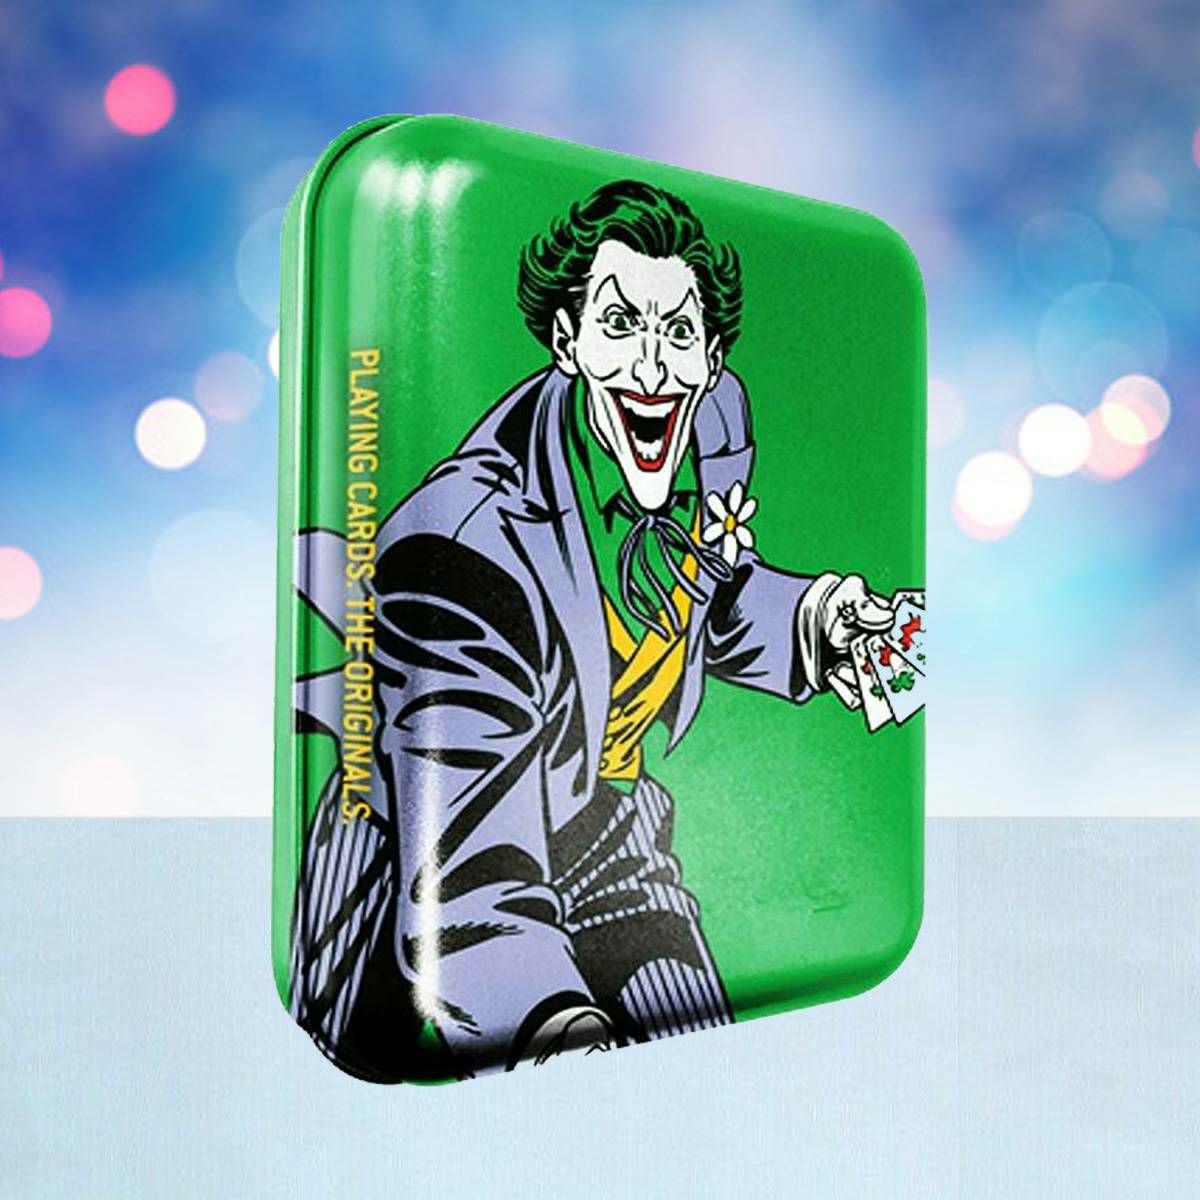 DC Super Heroes Joker Playing Cards